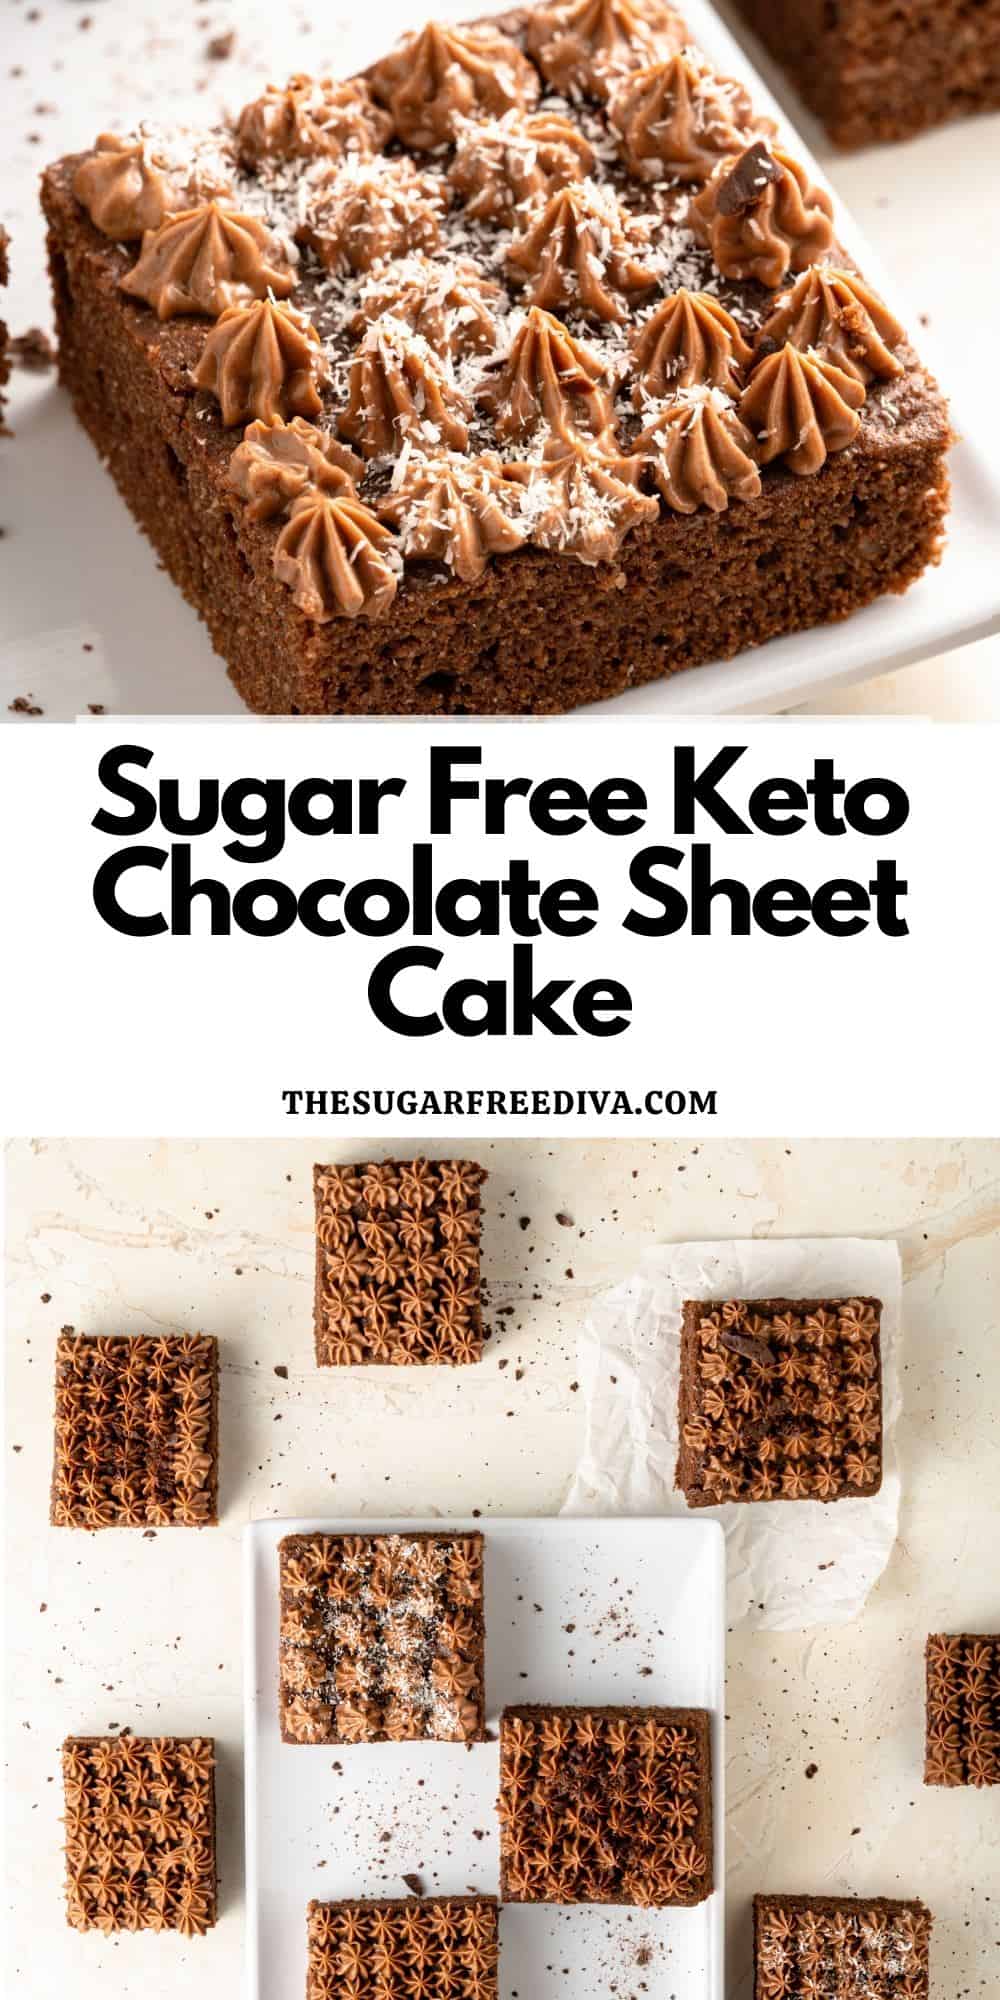 Sugar Free Chocolate Sheet Cake, a simple and tasty dessert recipe that is keto, low carb, and gluten free diet friendly.